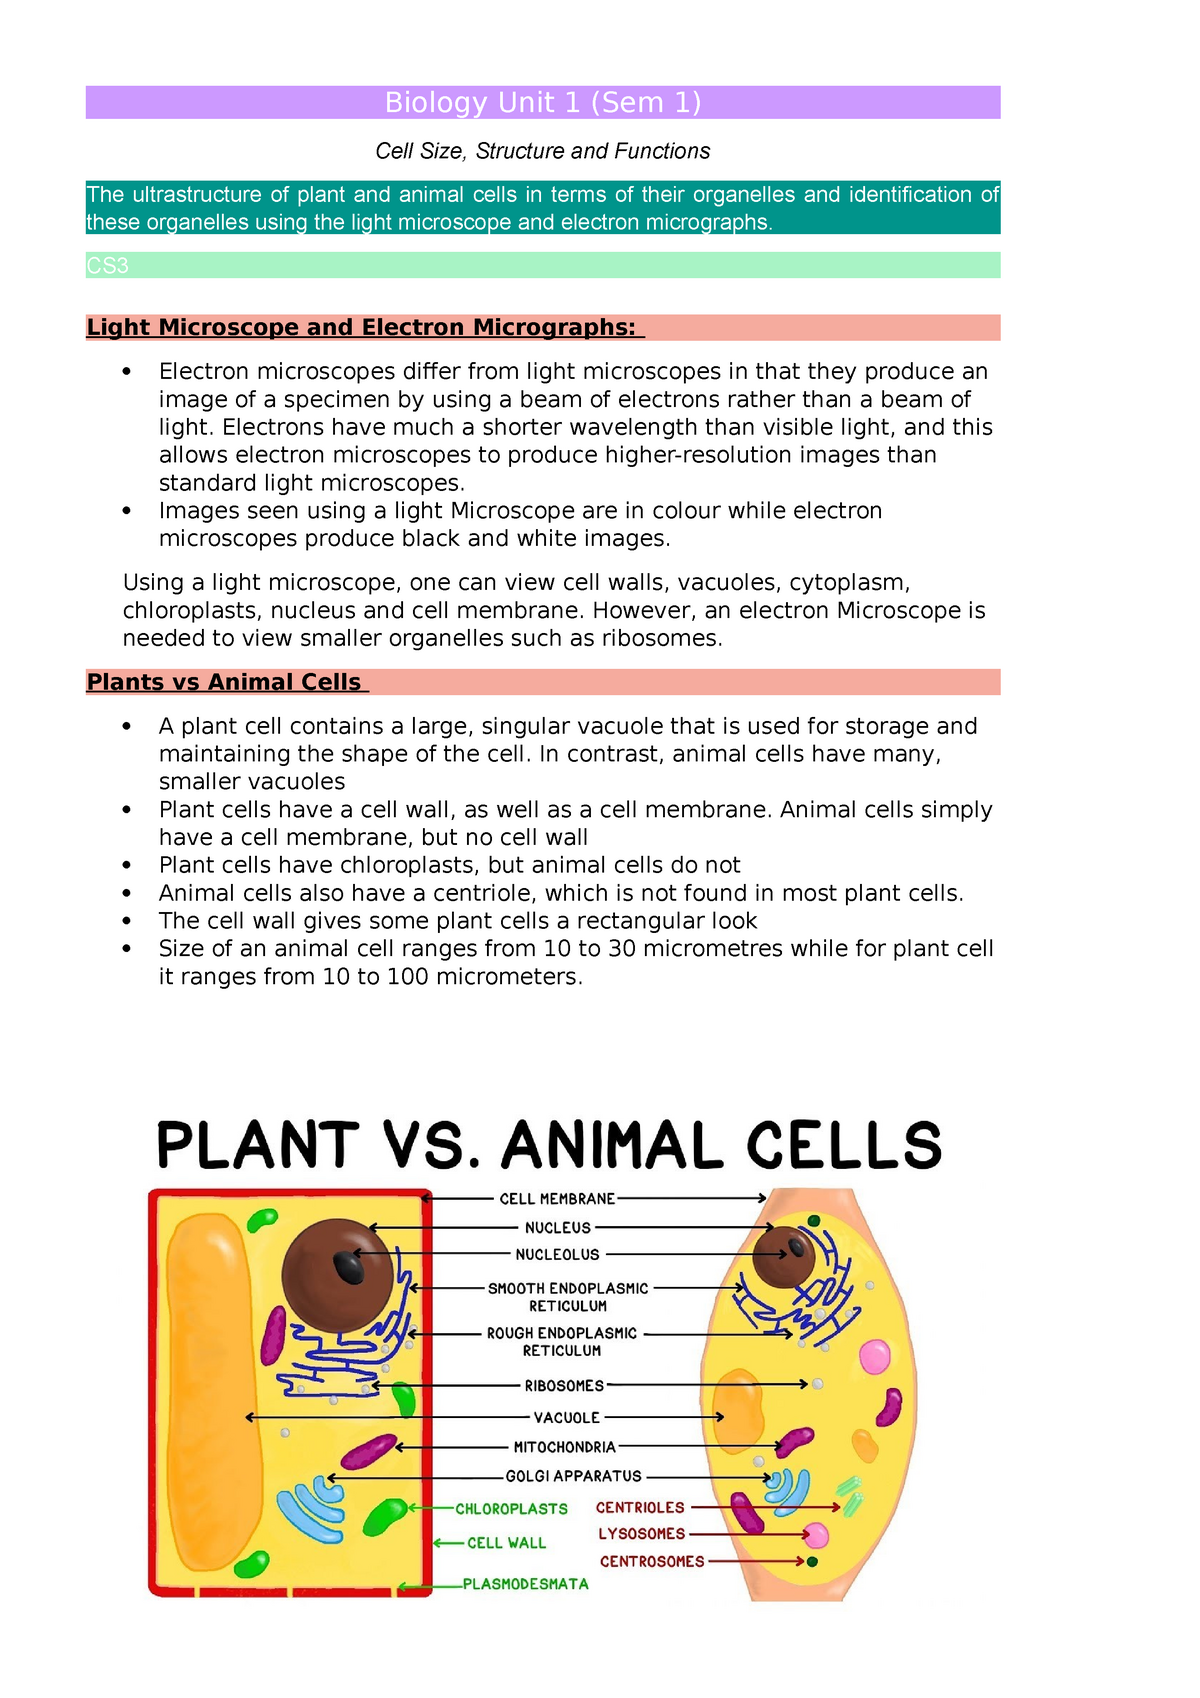 CS3 Electron and Light Microscopes and Animal vs Plant Cells - Biology Unit  1 (Sem 1) Cell Size, - Studocu